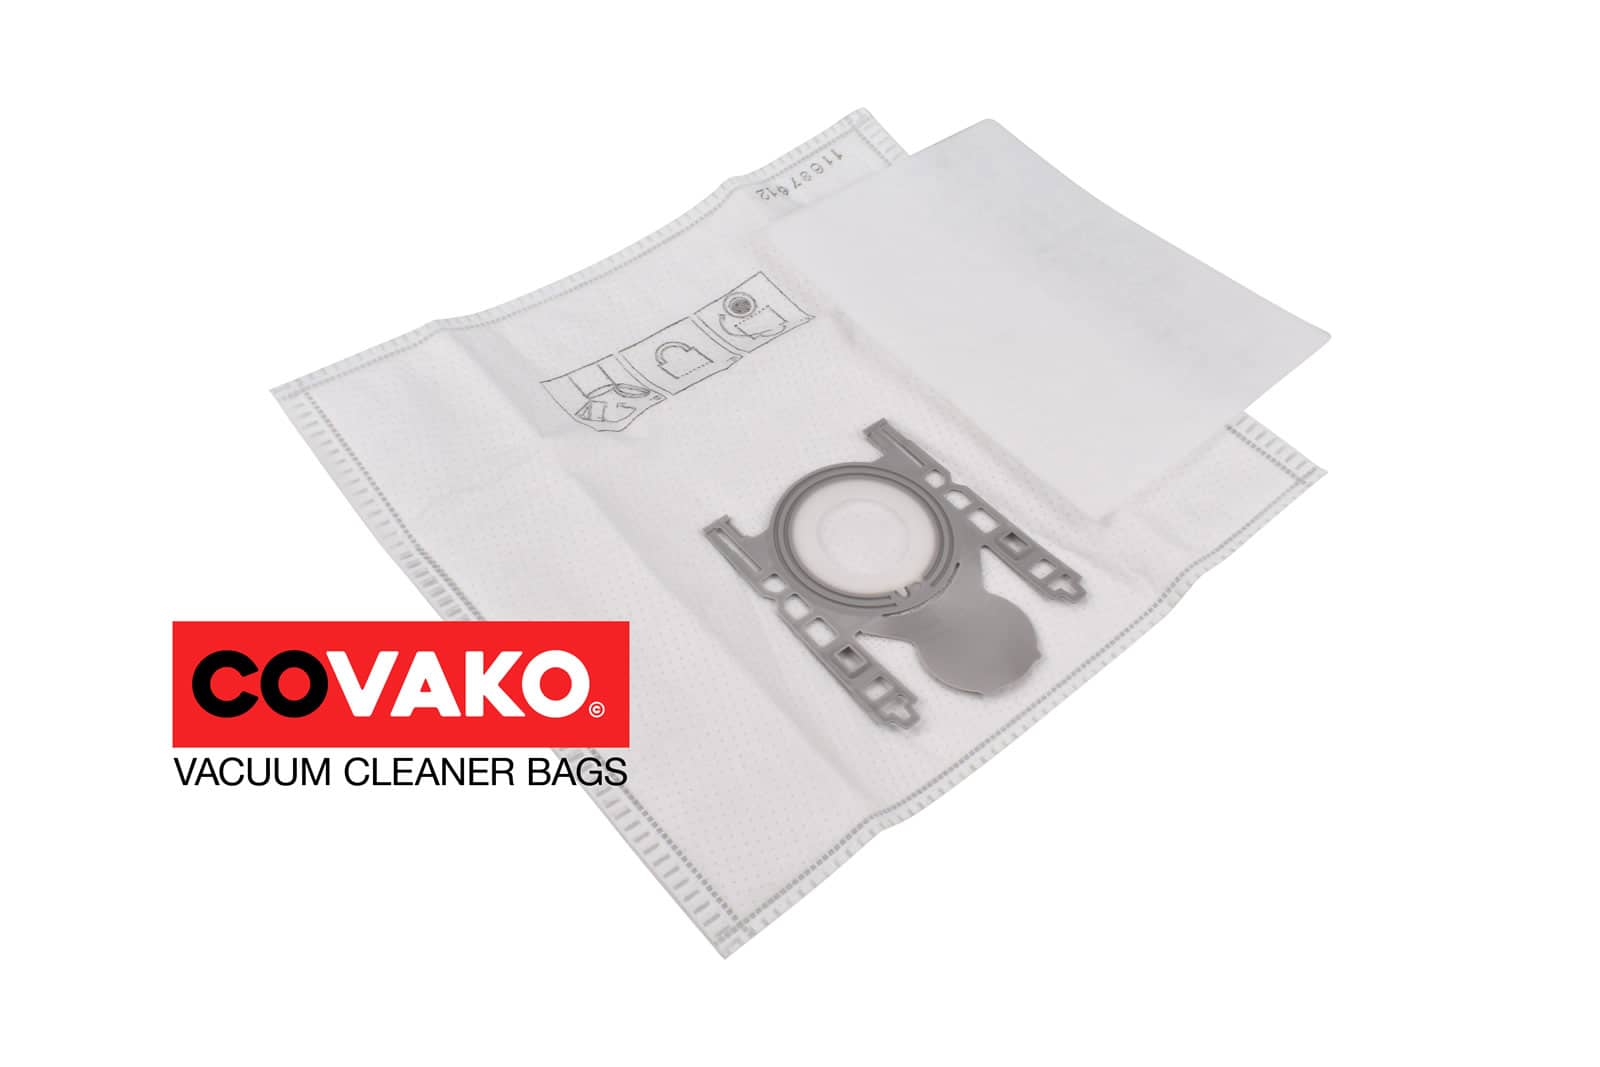 Bosch BBS 8000-8999 / Synthesis - Bosch vacuum cleaner bags